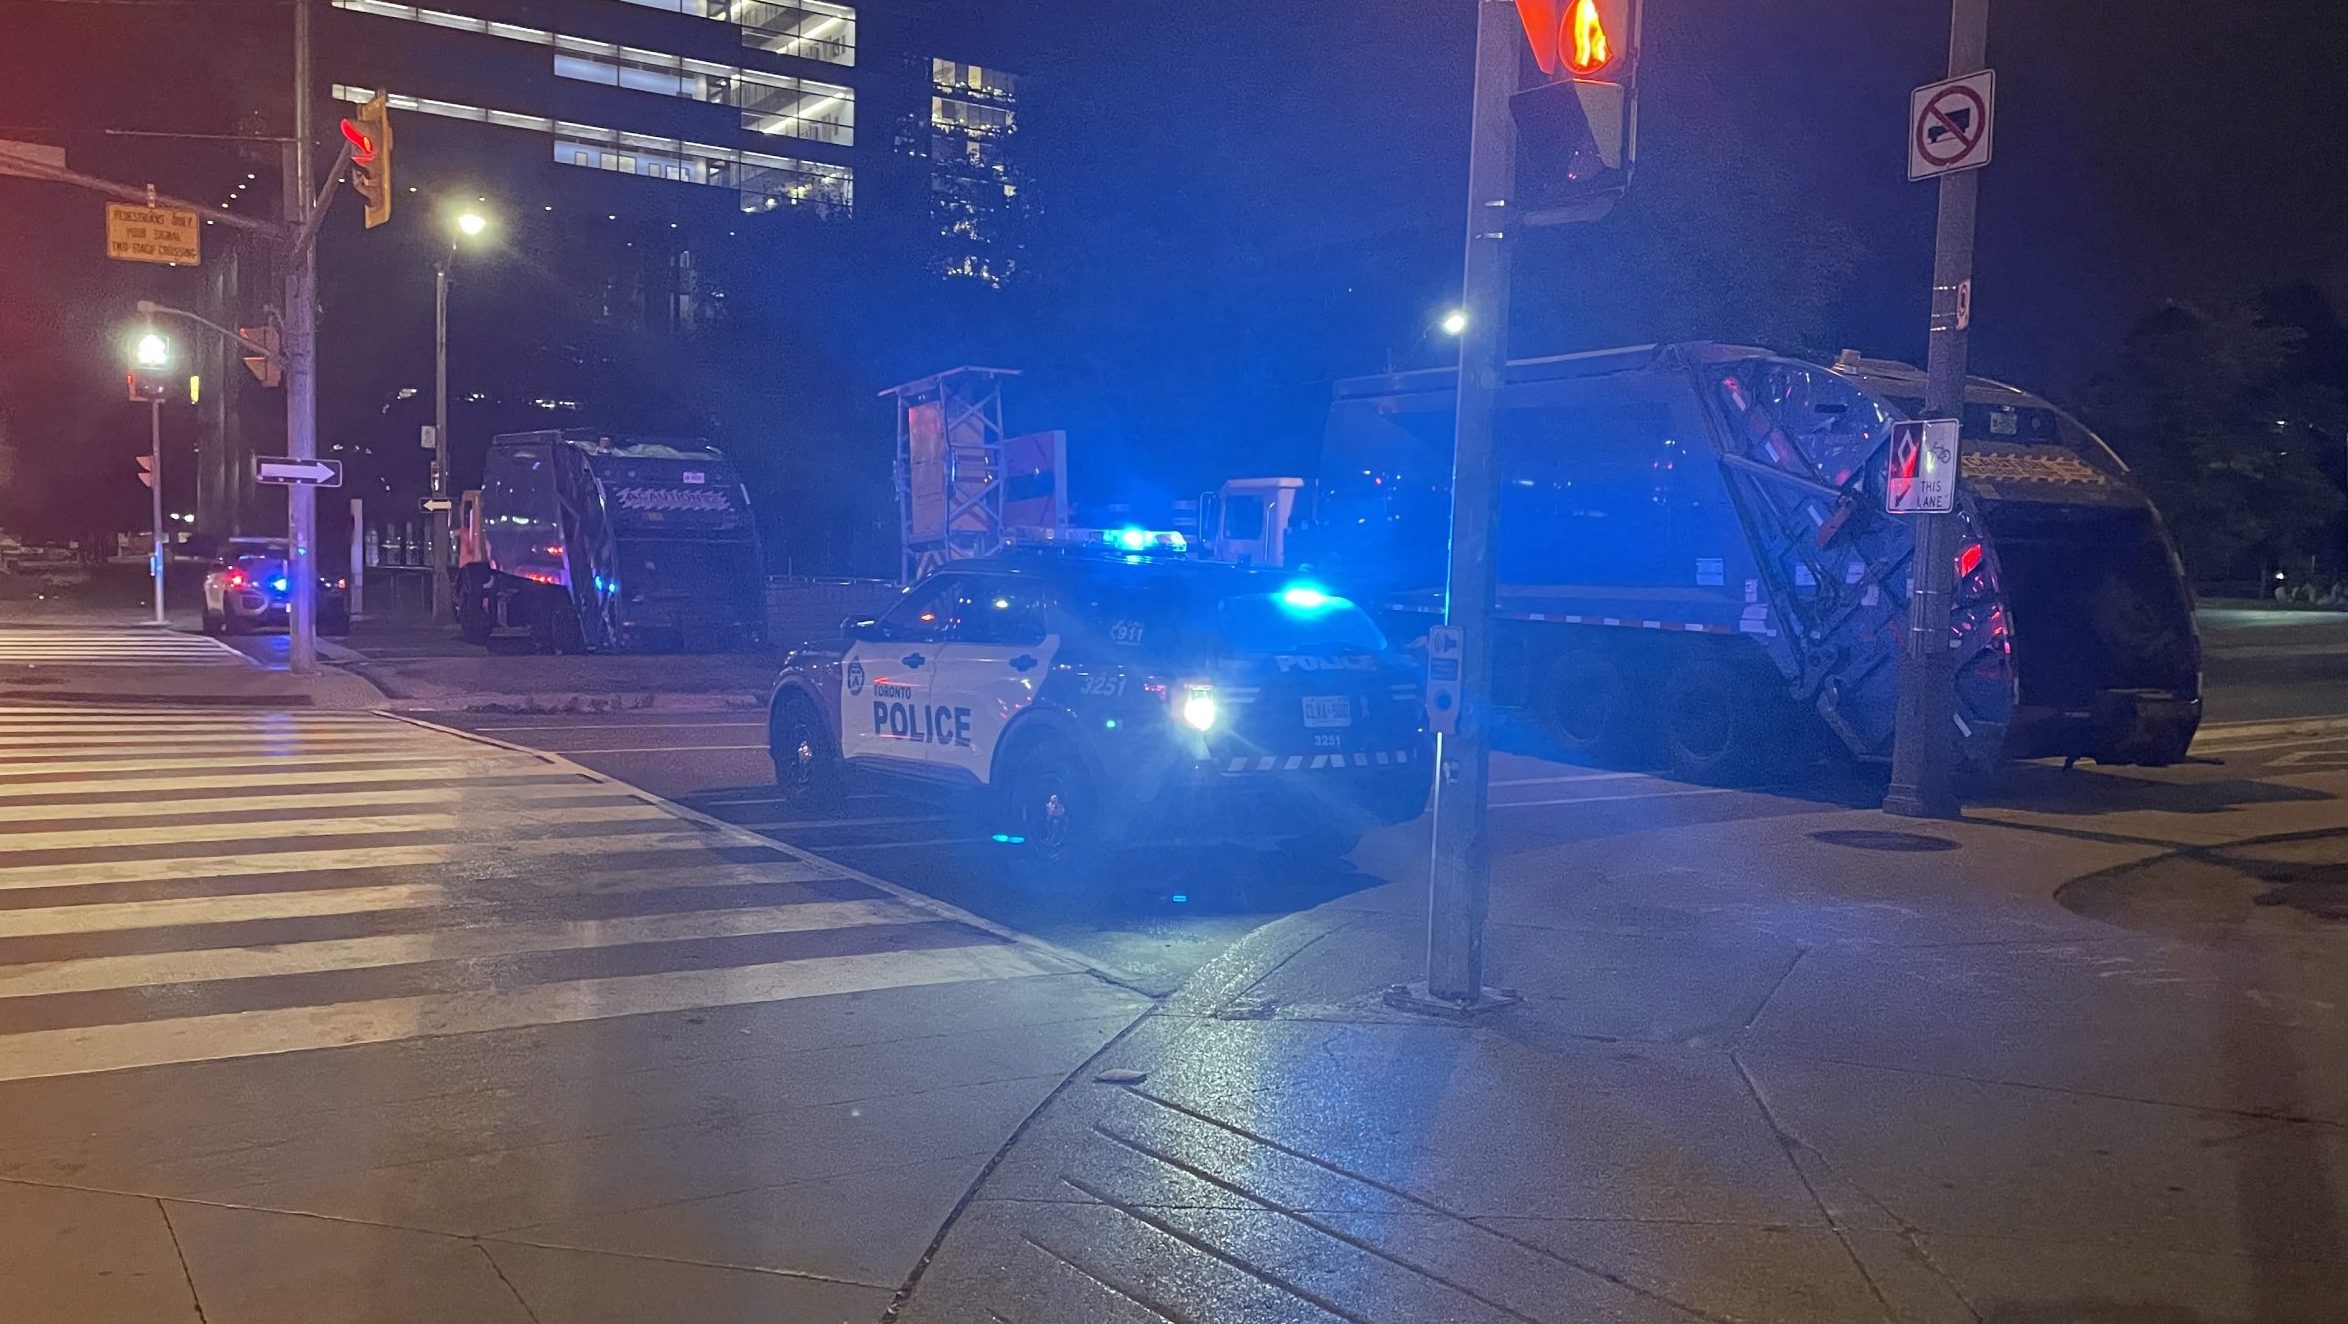 Queen’s Park blocked to traffic ahead of potential convoy protest: Toronto police